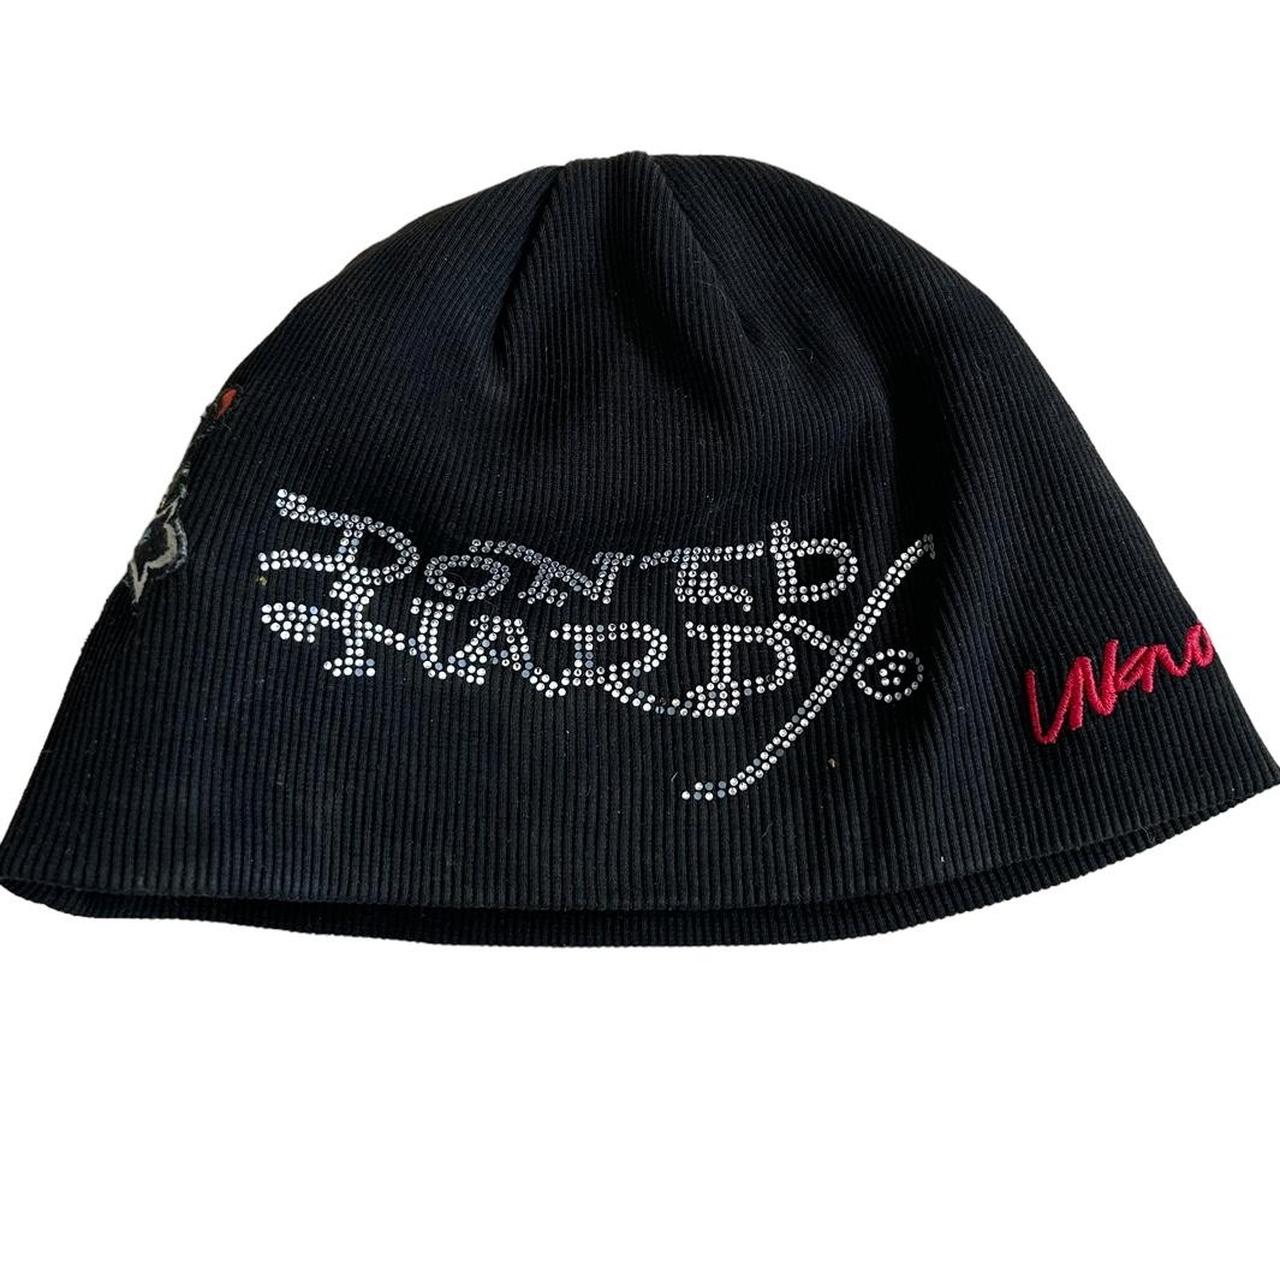 Don Ed Hardy x Unknown London Beanie Hat Missing a... - Depop